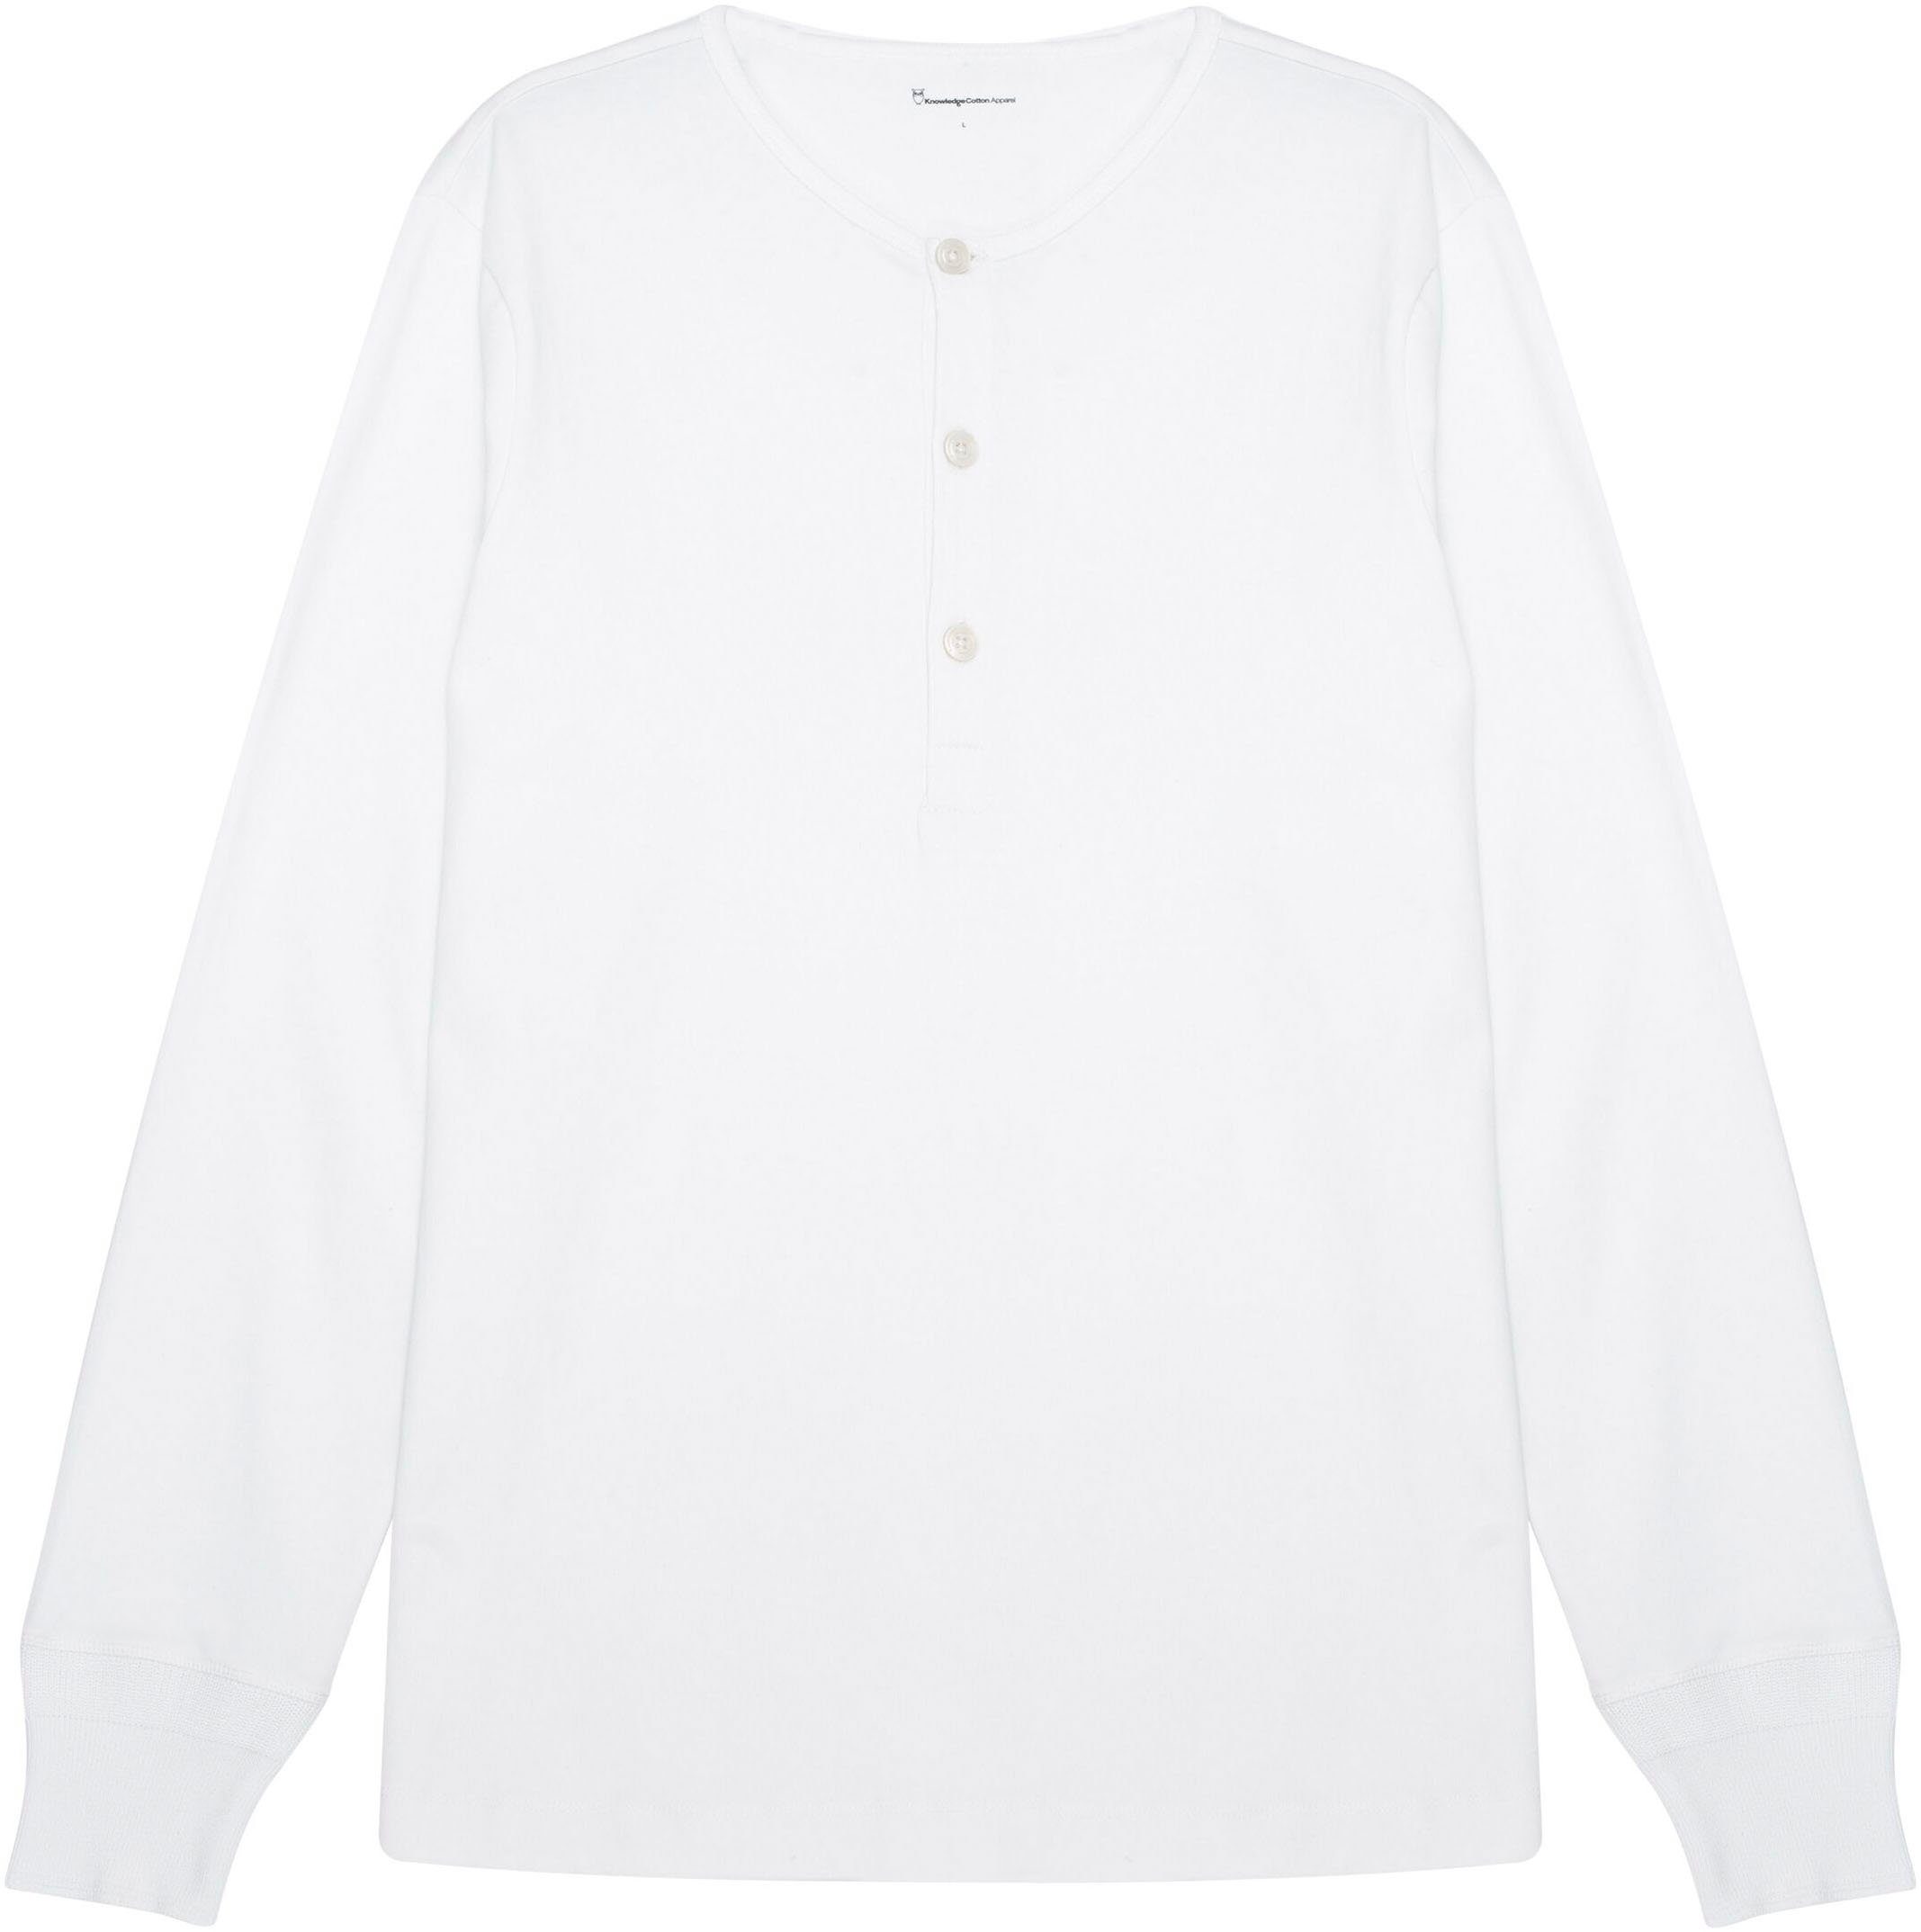 Bright White Longsleeve Brusthöhe Apparel mit in Henley KnowledgeCotton Labeling